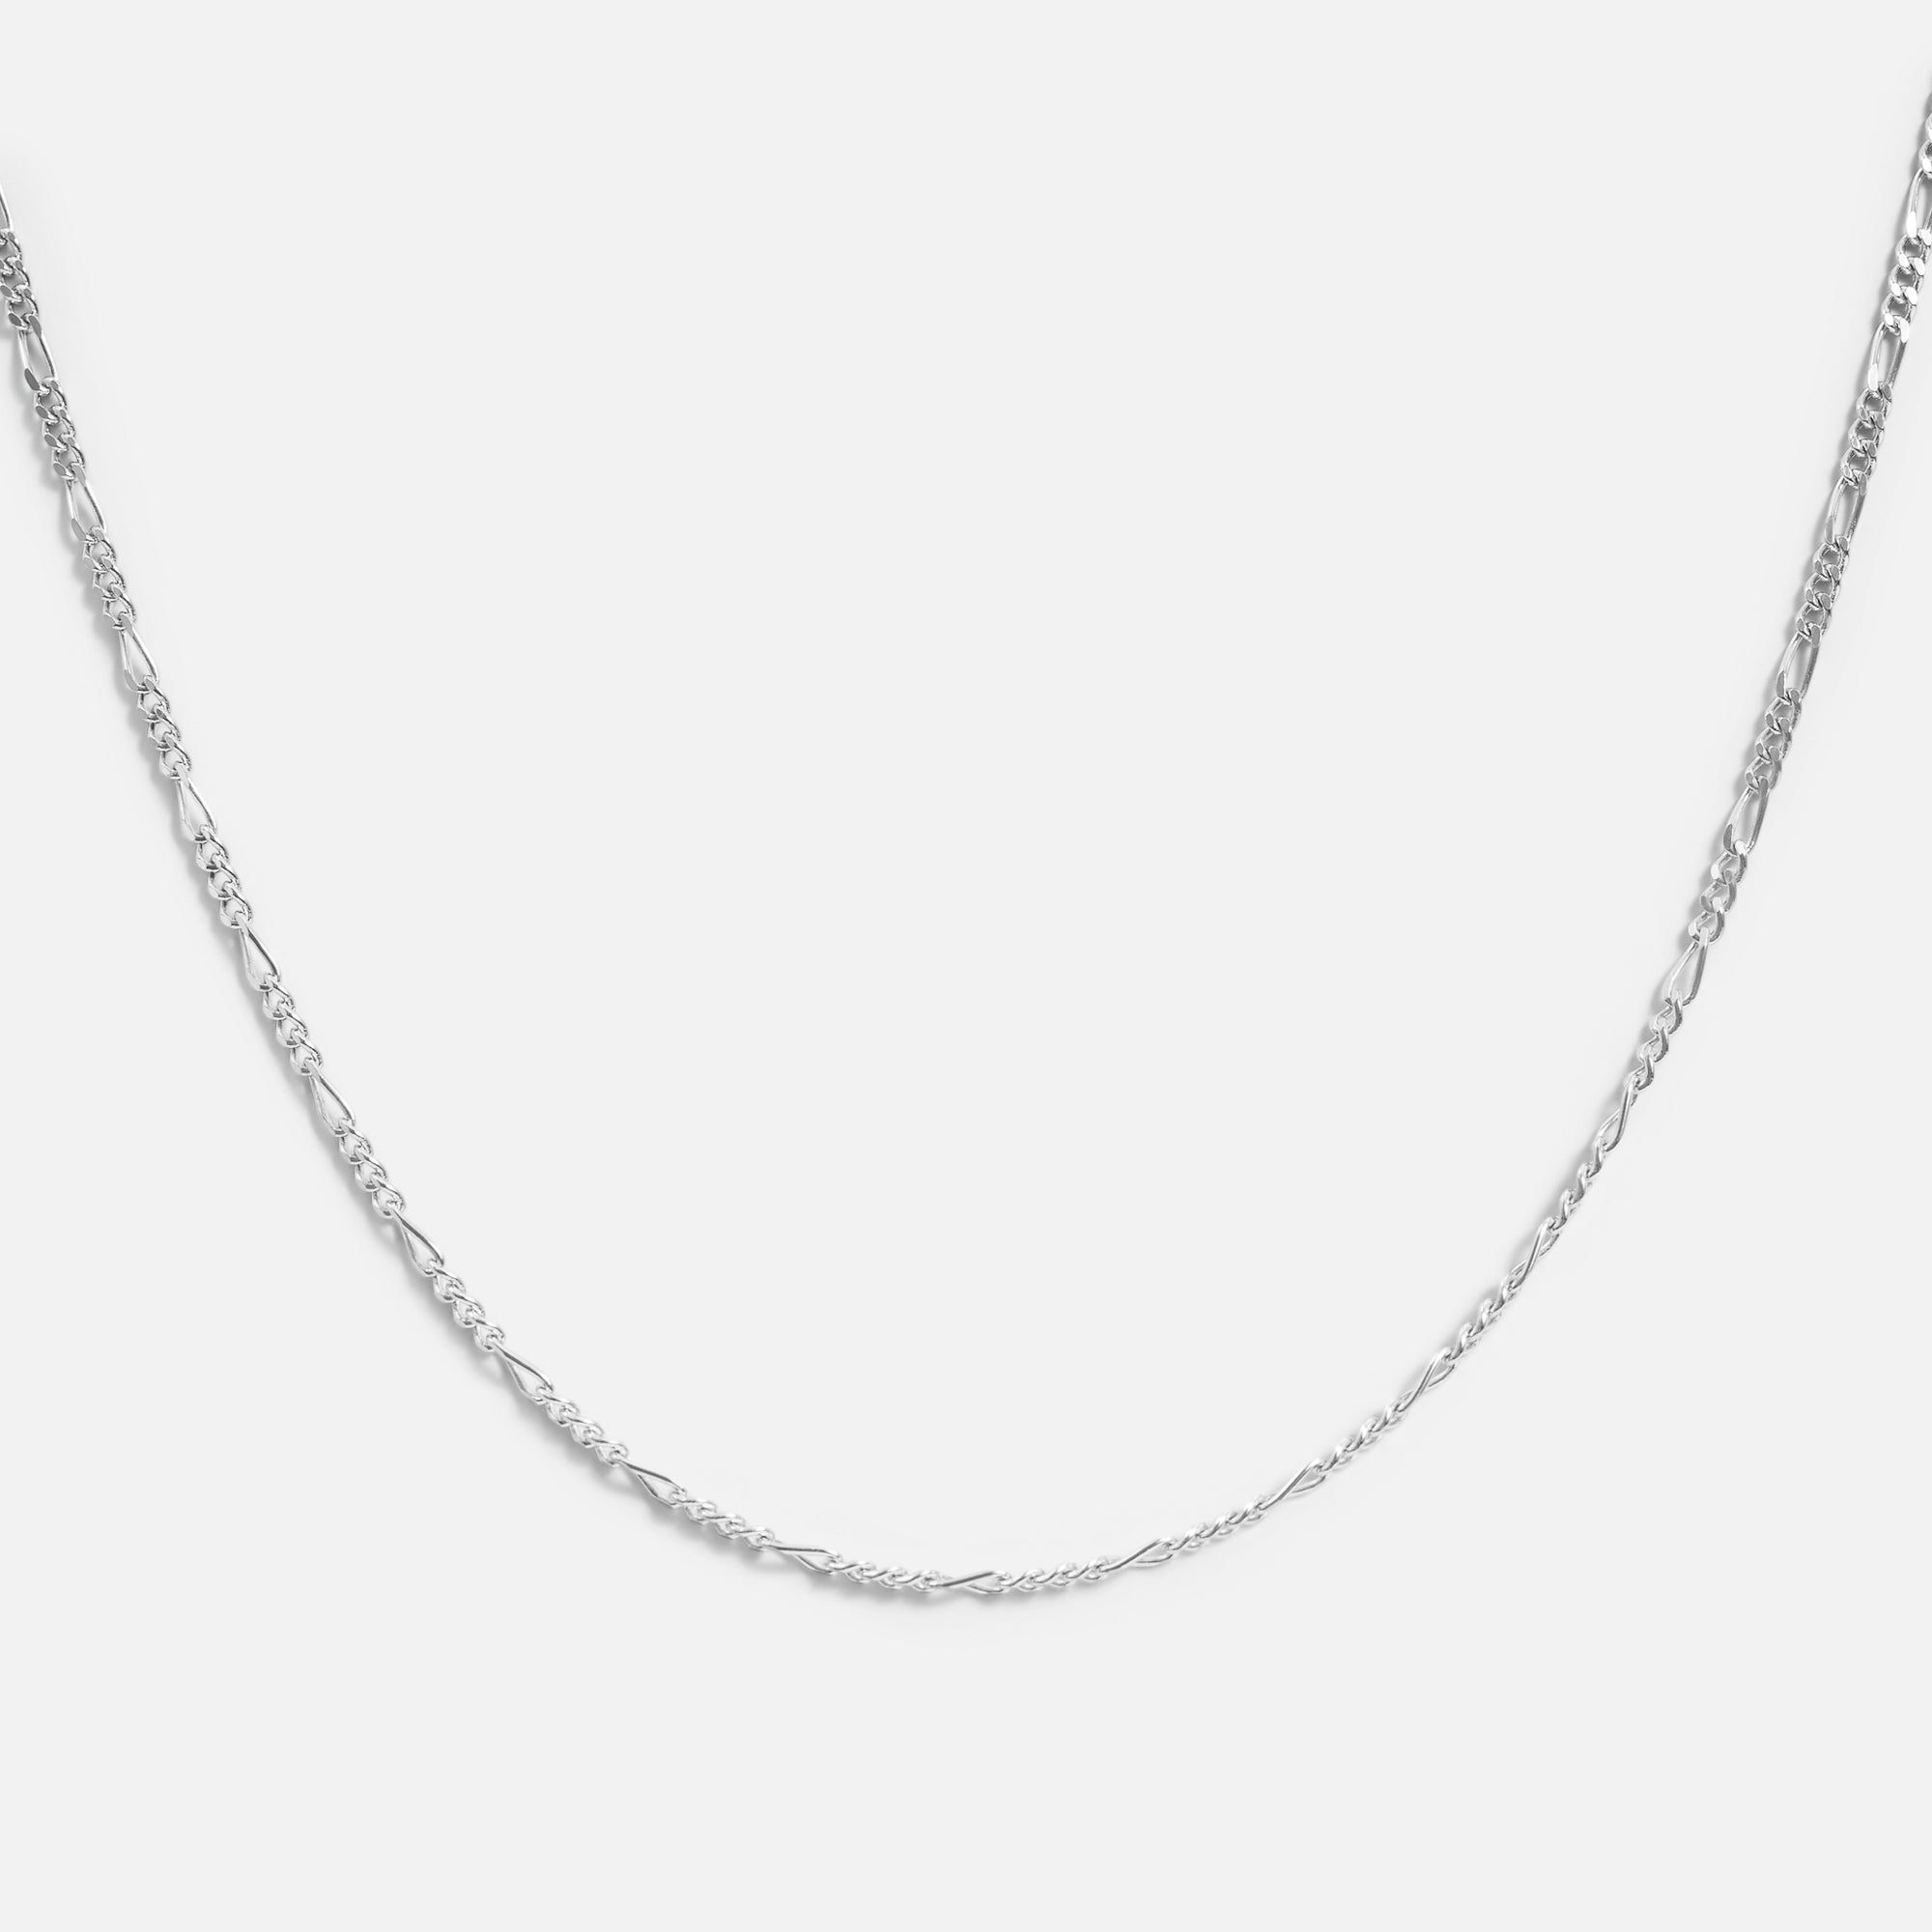 20'' sterling silver figaro chain